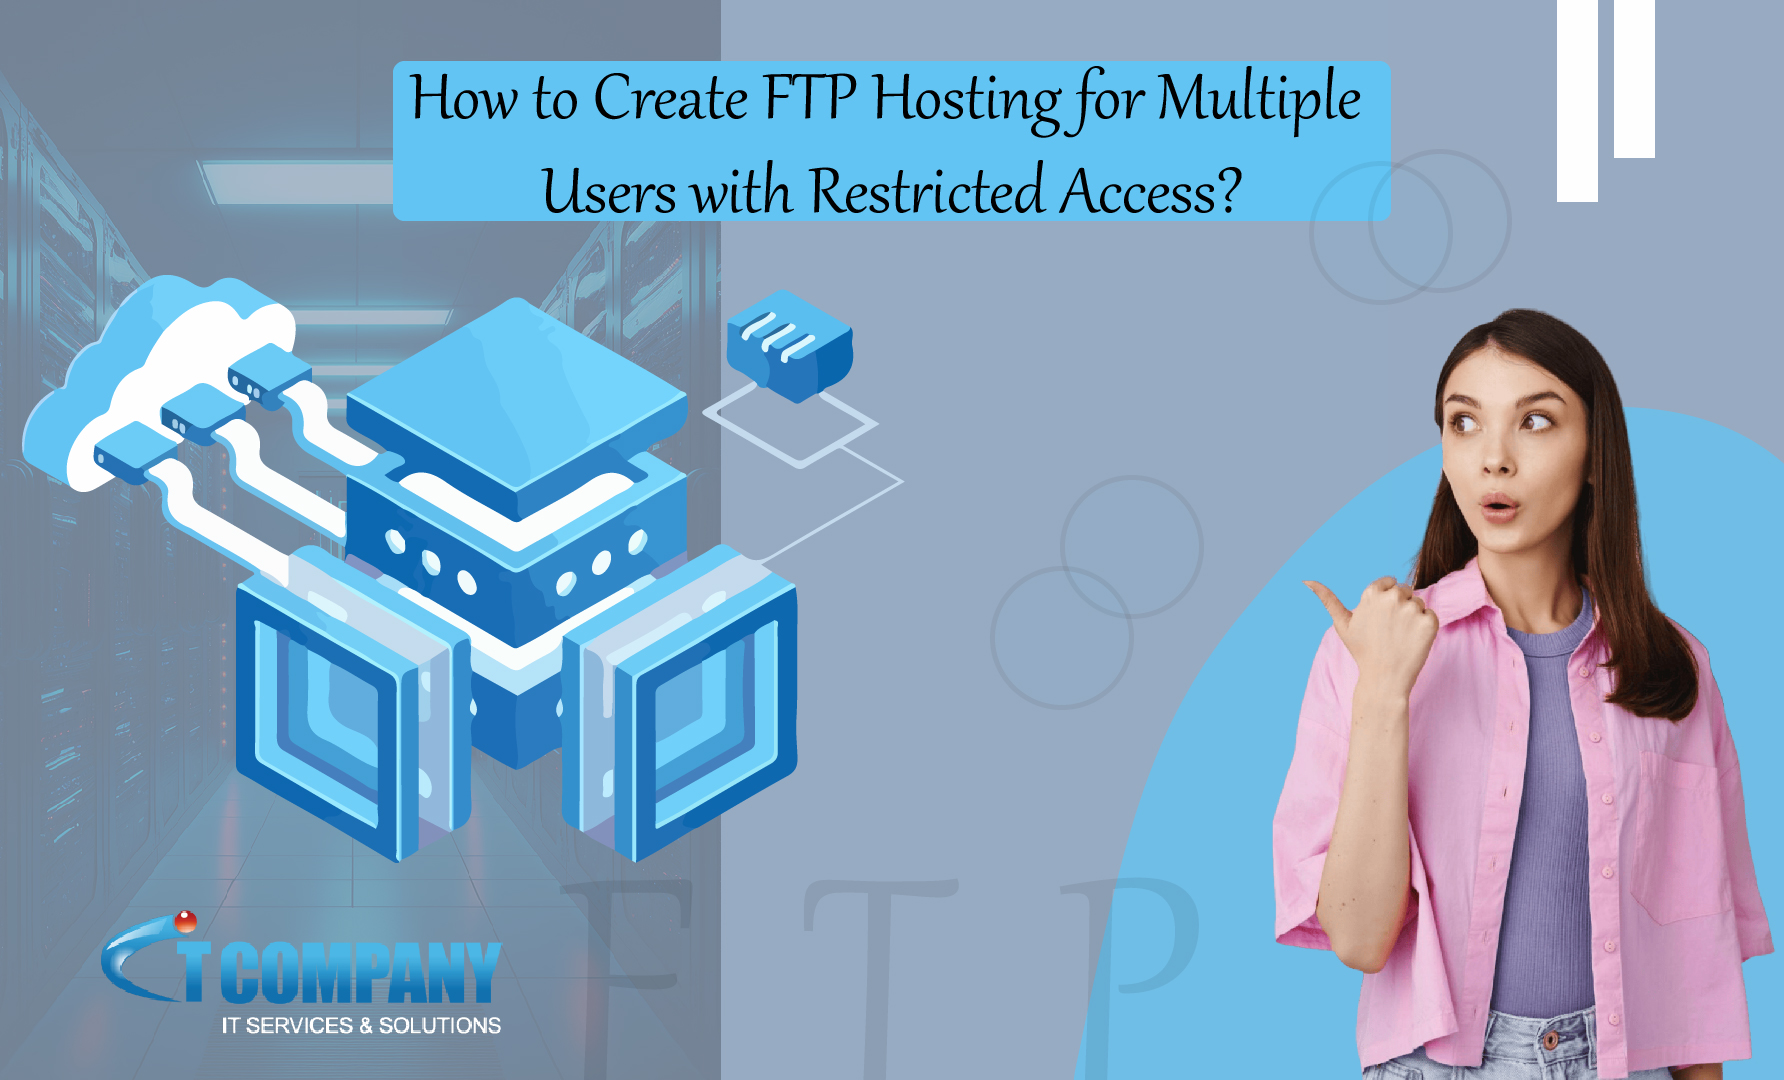 How to Create Multiple FTP Hosting User Logins with Limited Access